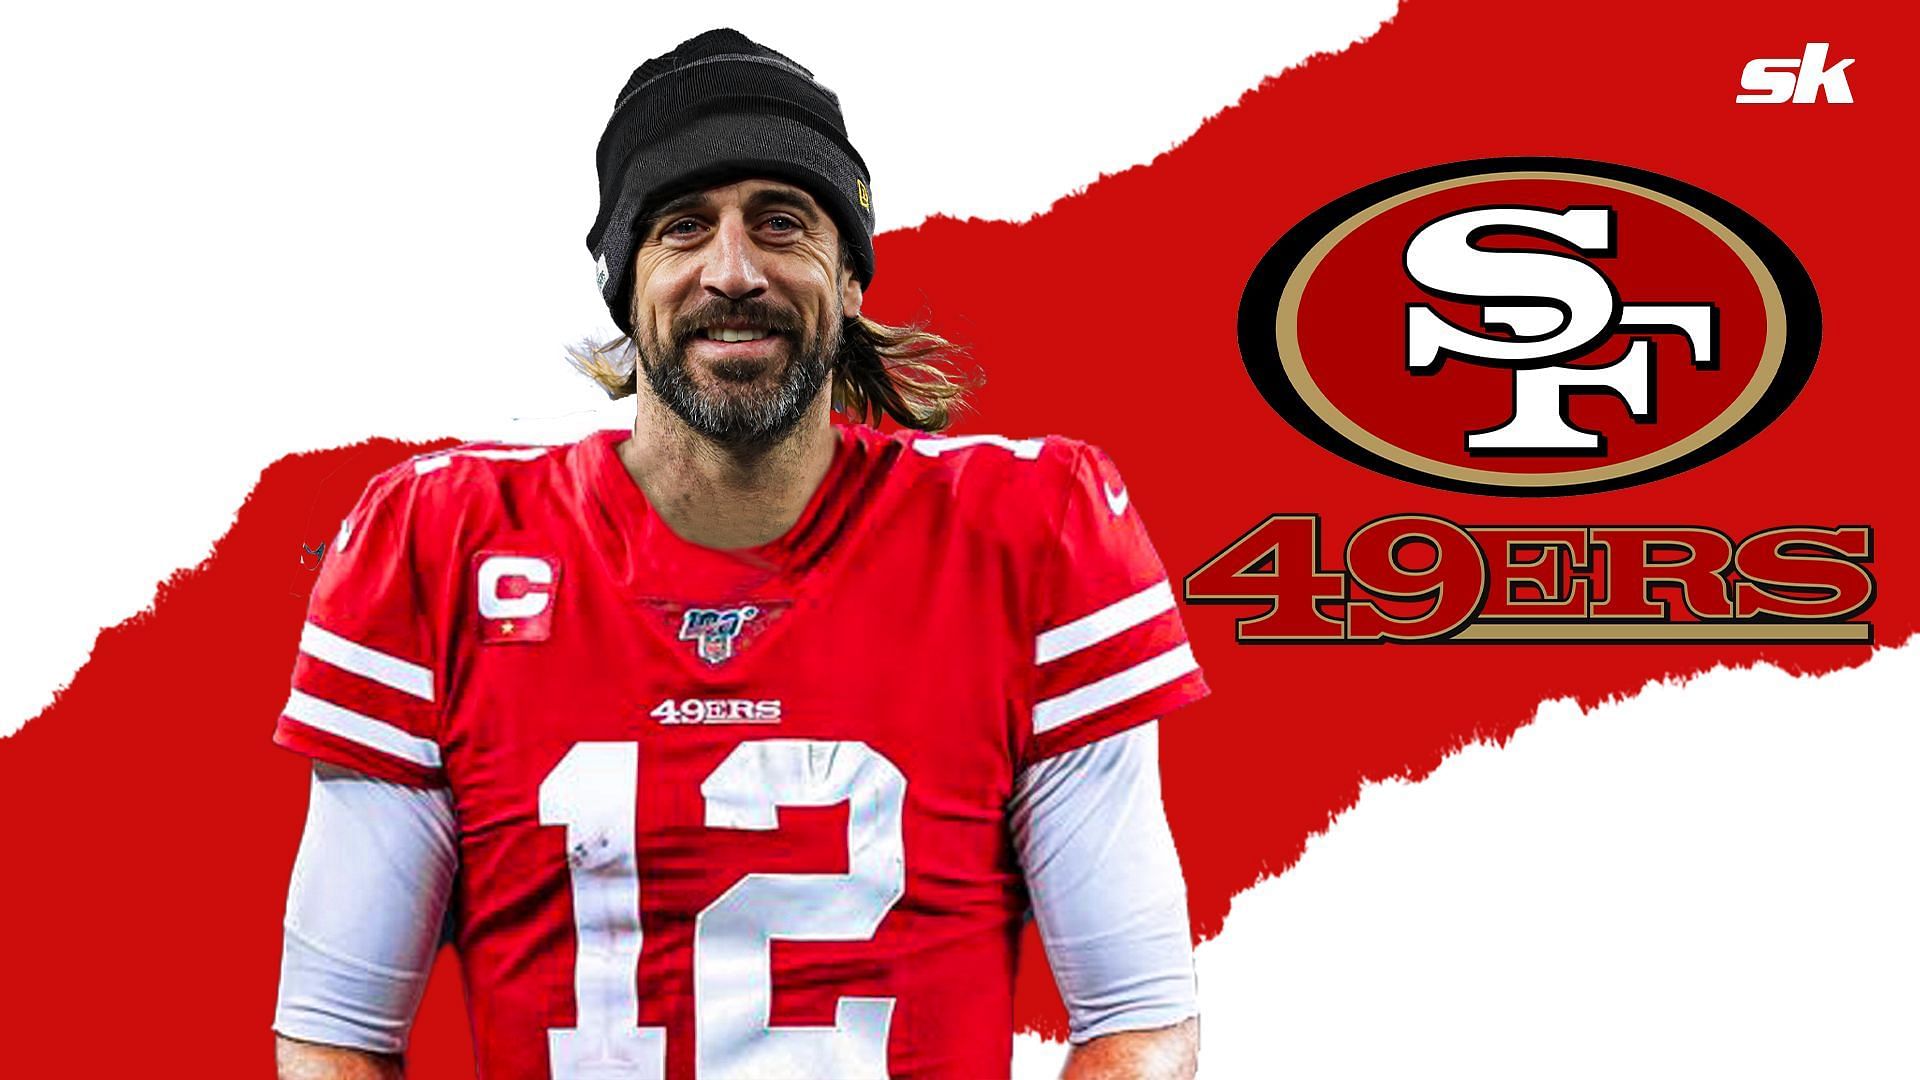 Green Bay Packers QB Aaron Rodgers to the San Francisco 49ers?